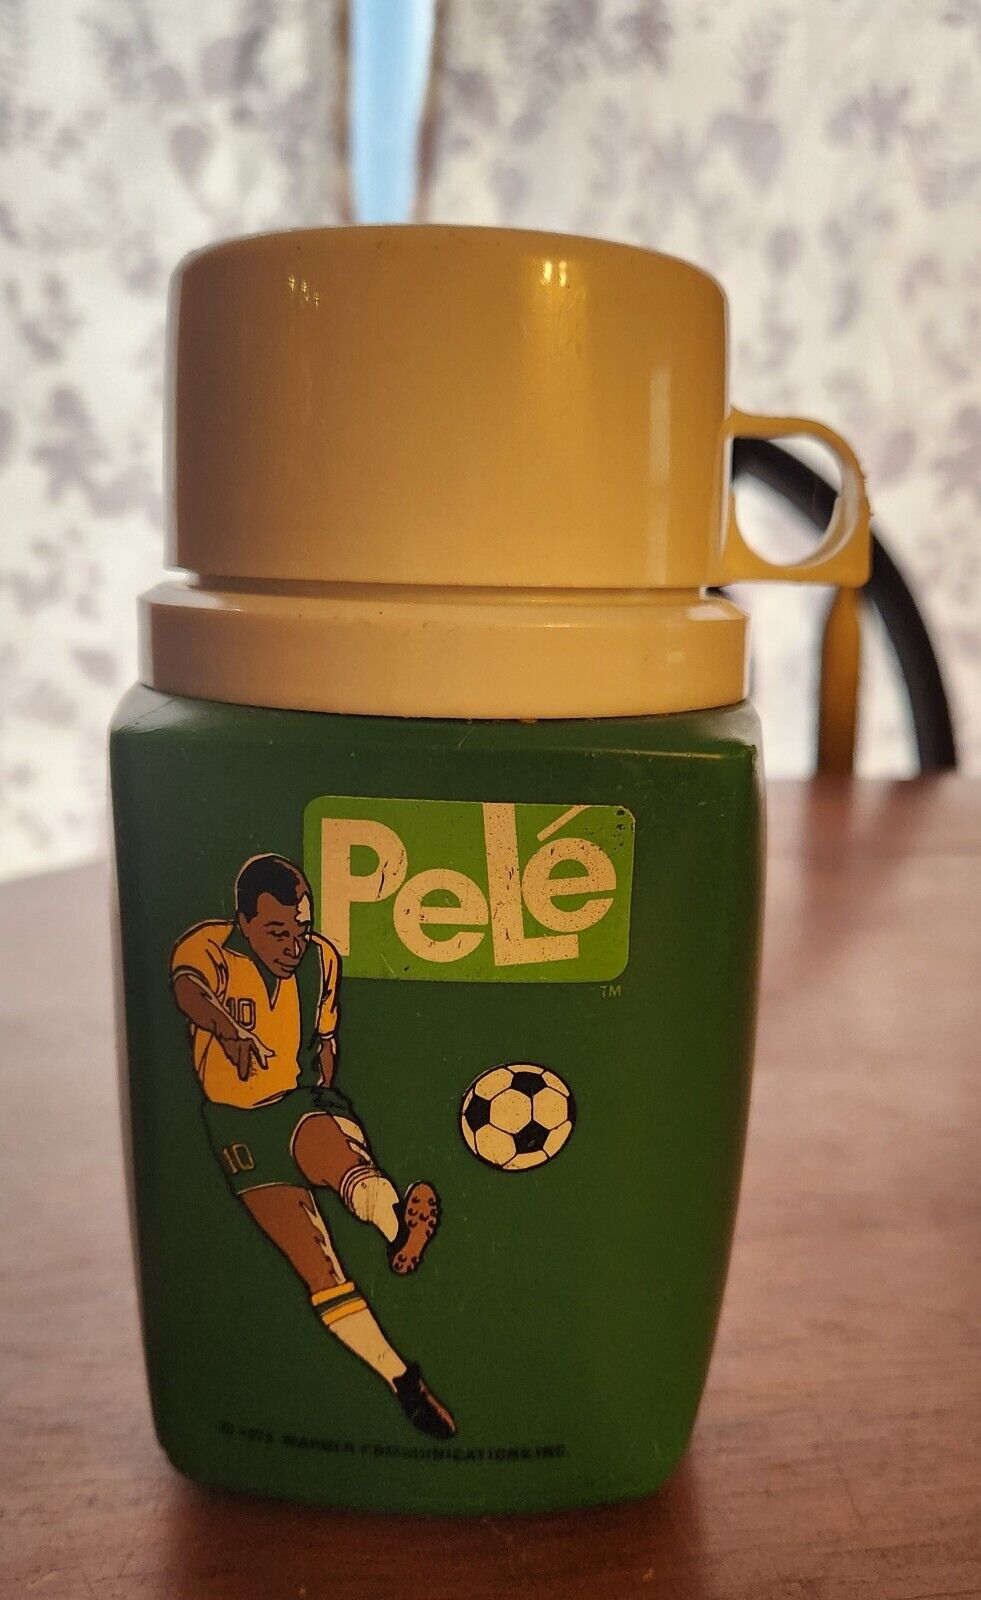 1975 Soccer, Vintage Pele Lunchbox Plastic Thermos